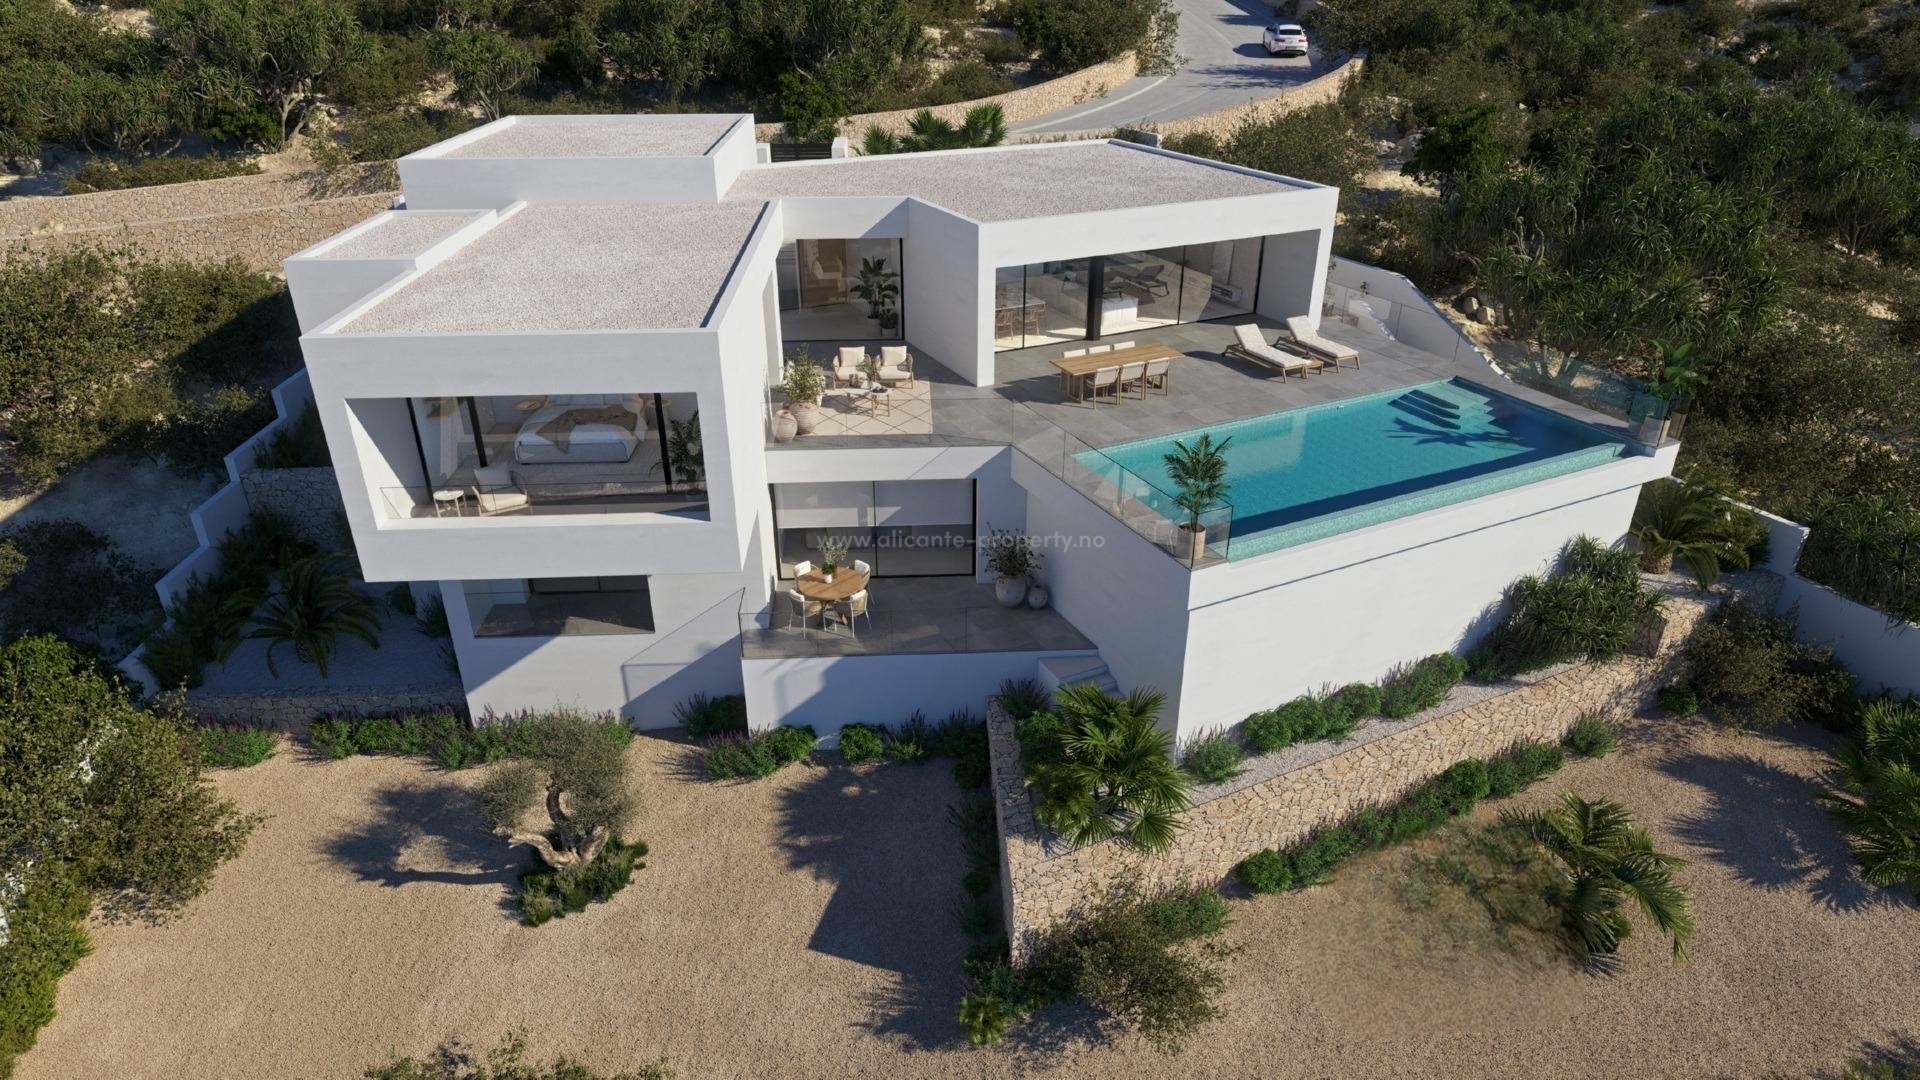 Luxury villa in Cumbra del Sol near Benitechell, 3 bedrooms, 4 bathrooms, incredible views, the terrace is crowned by an infinity pool overlooking the Mediterranean